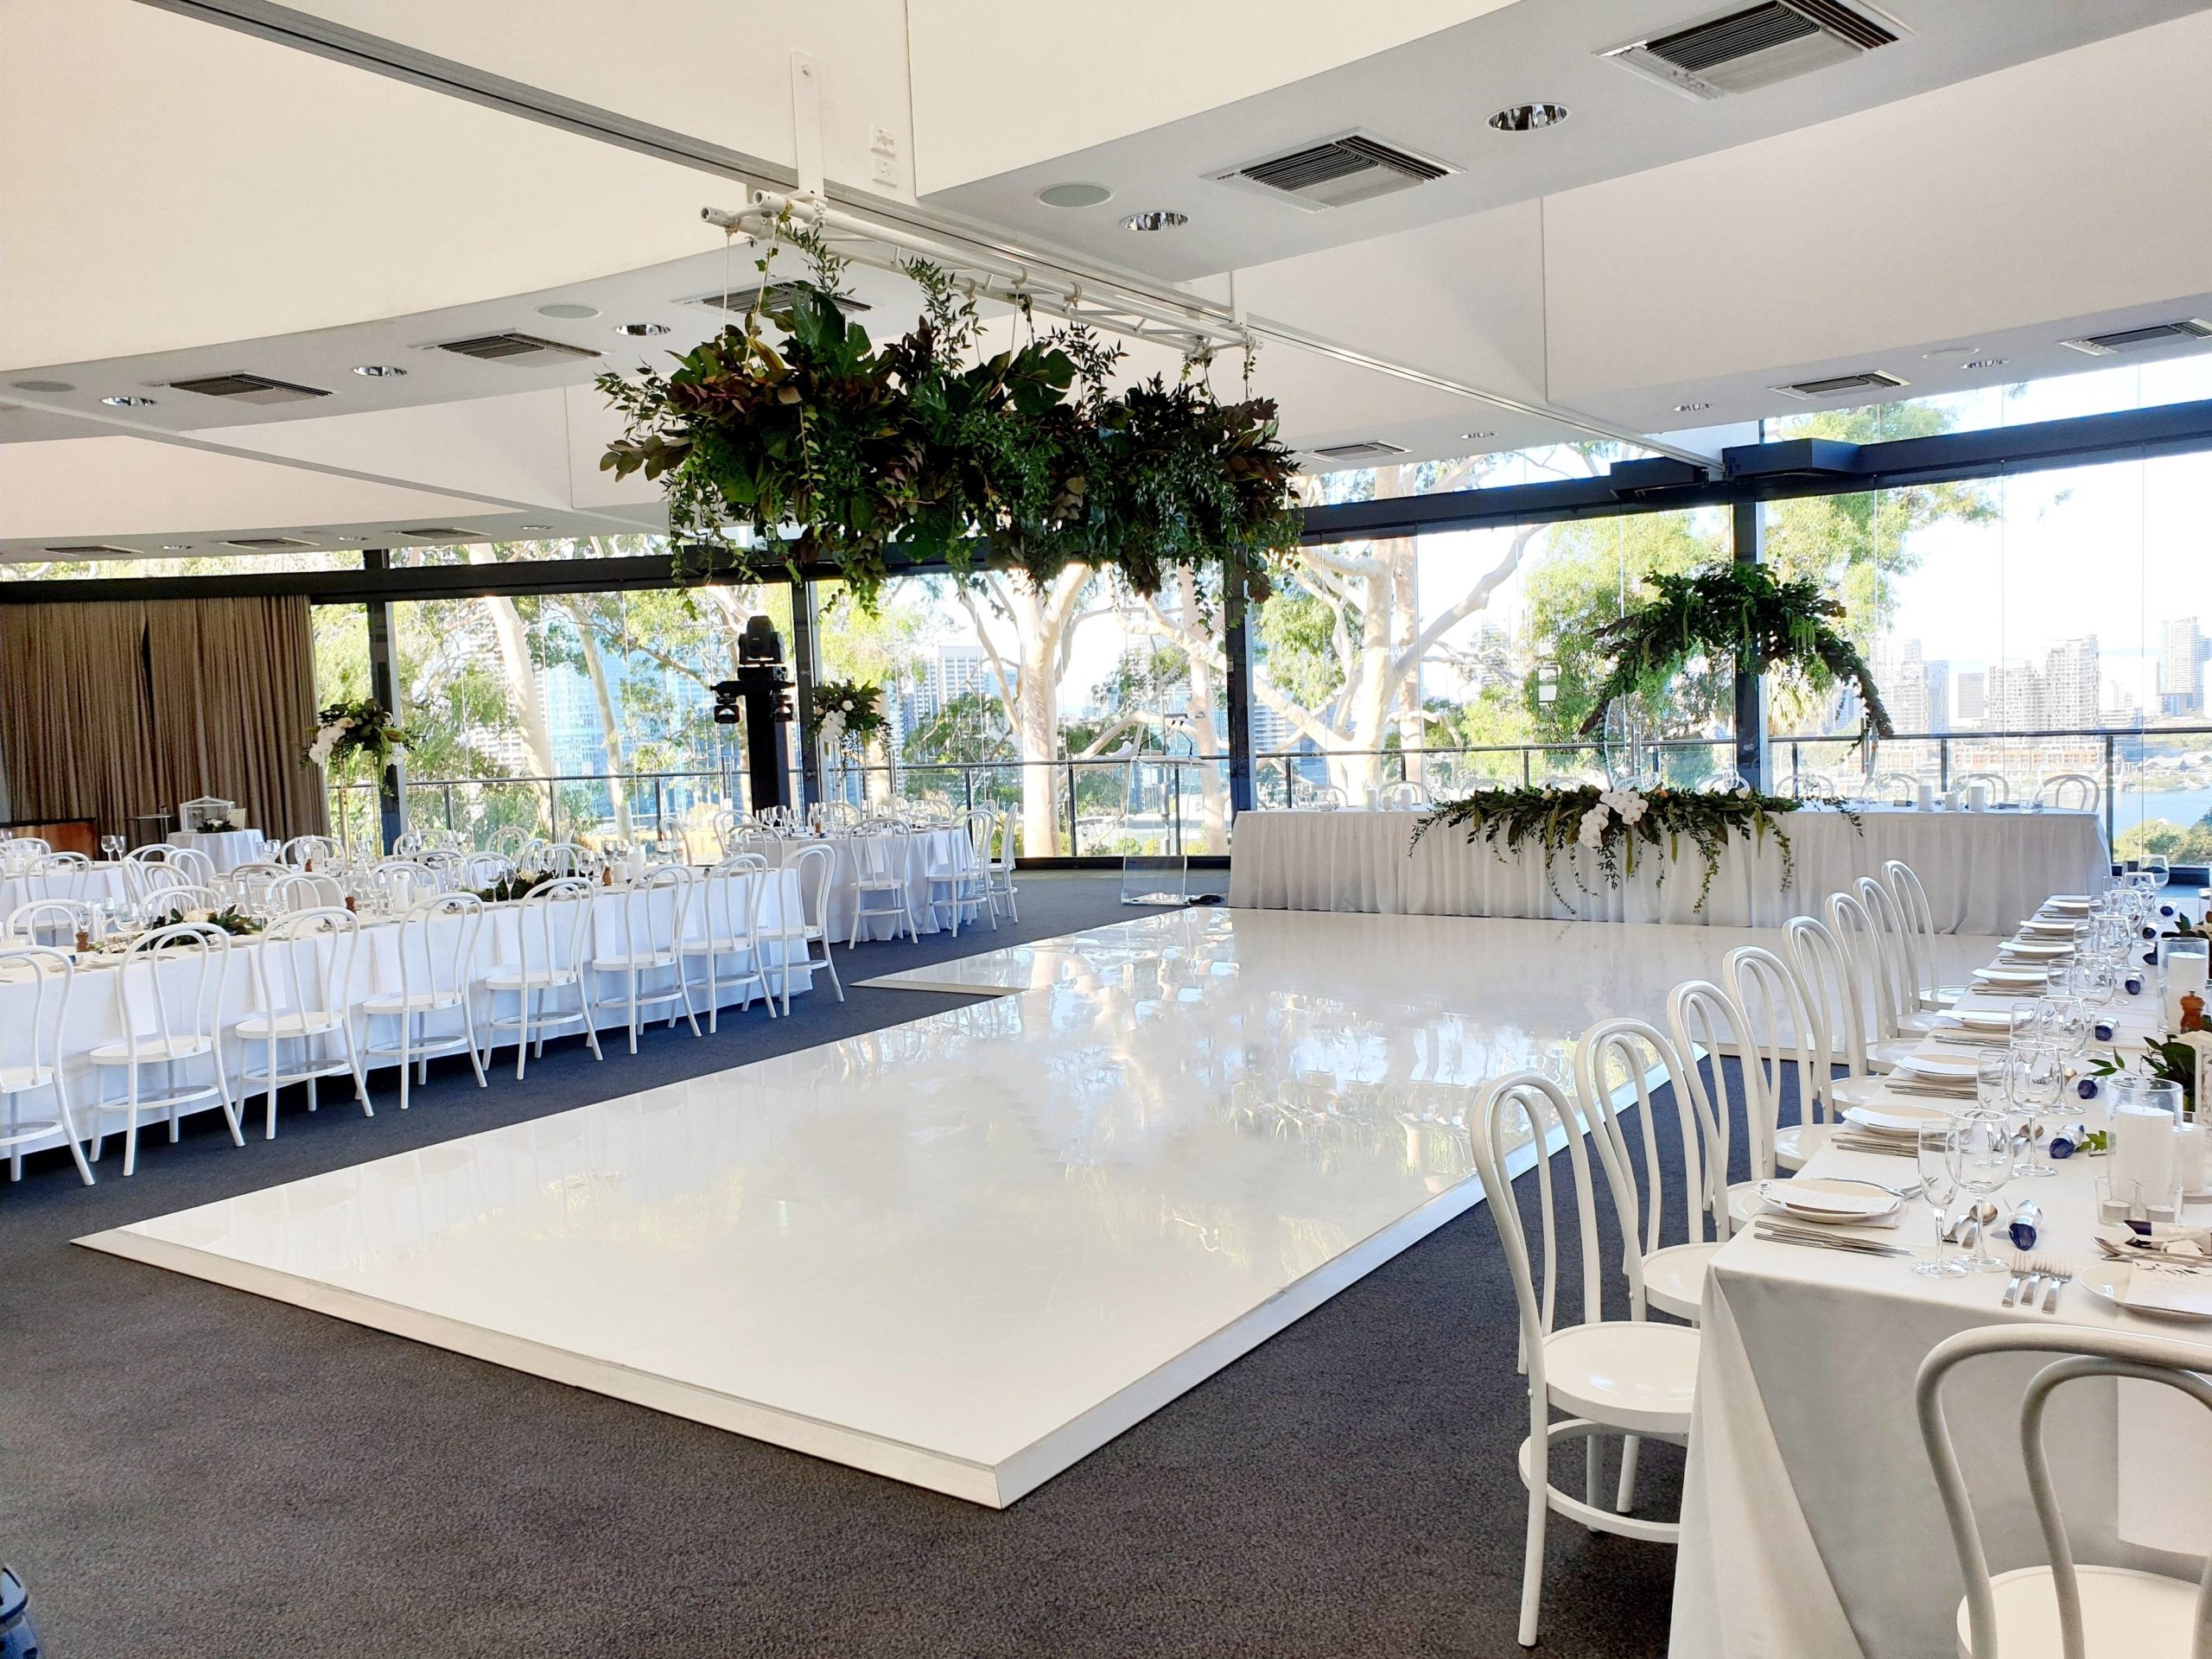 White gloss dance floor hire perth <a href='#' class='view-taggged-products' data-id=2980>Click to View Products</a><div class='taggged-products-slider-wrap'><div class='heading-tag-products'></div><div class='taggged-products-slider'></div></div><div class='loading-spinner'><i class='fa fa-spinner fa-spin'></i></div>